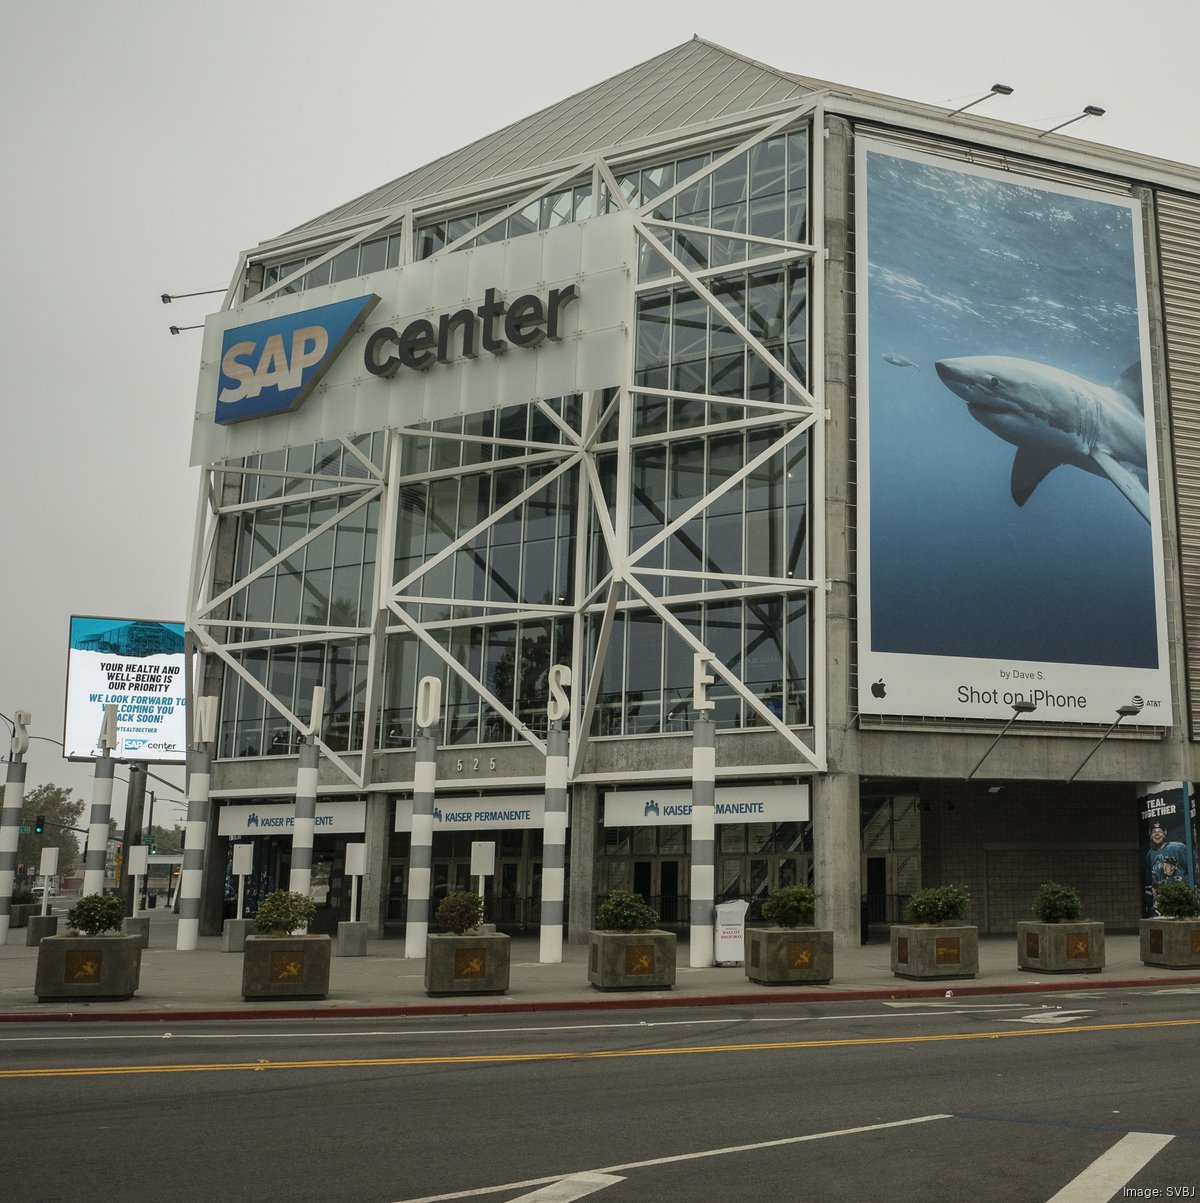 Sharks work to keep SAP Center modern as it begins its 25th season, with a  new arena 'not even on the radar' - The Athletic